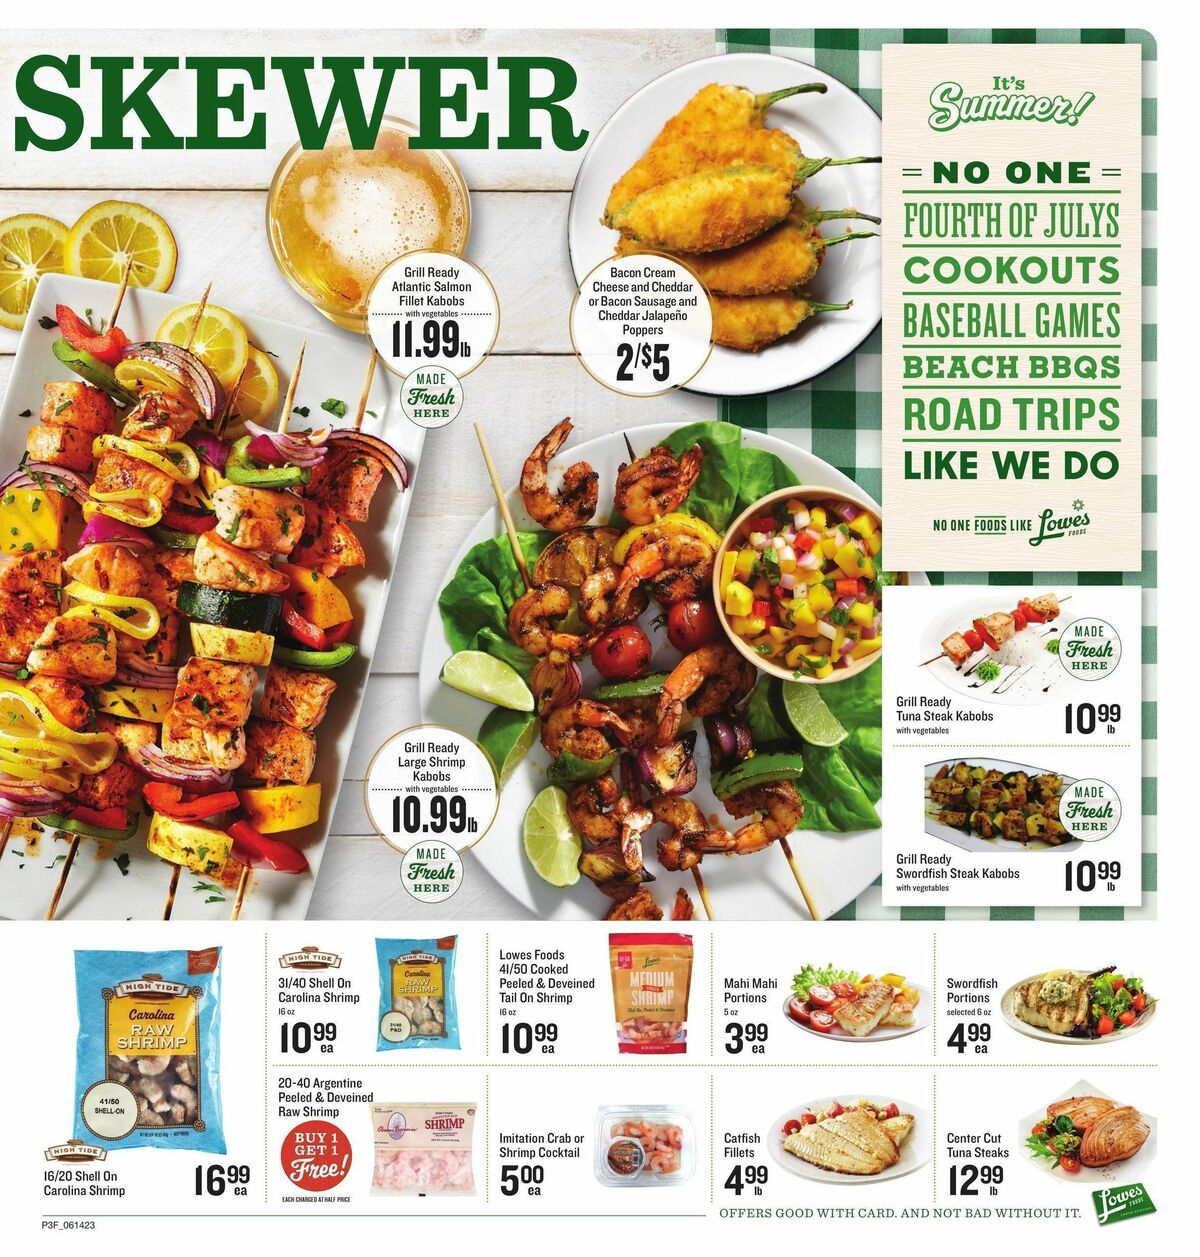 Lowes Foods Summer Grilling Weekly Ad from June 14